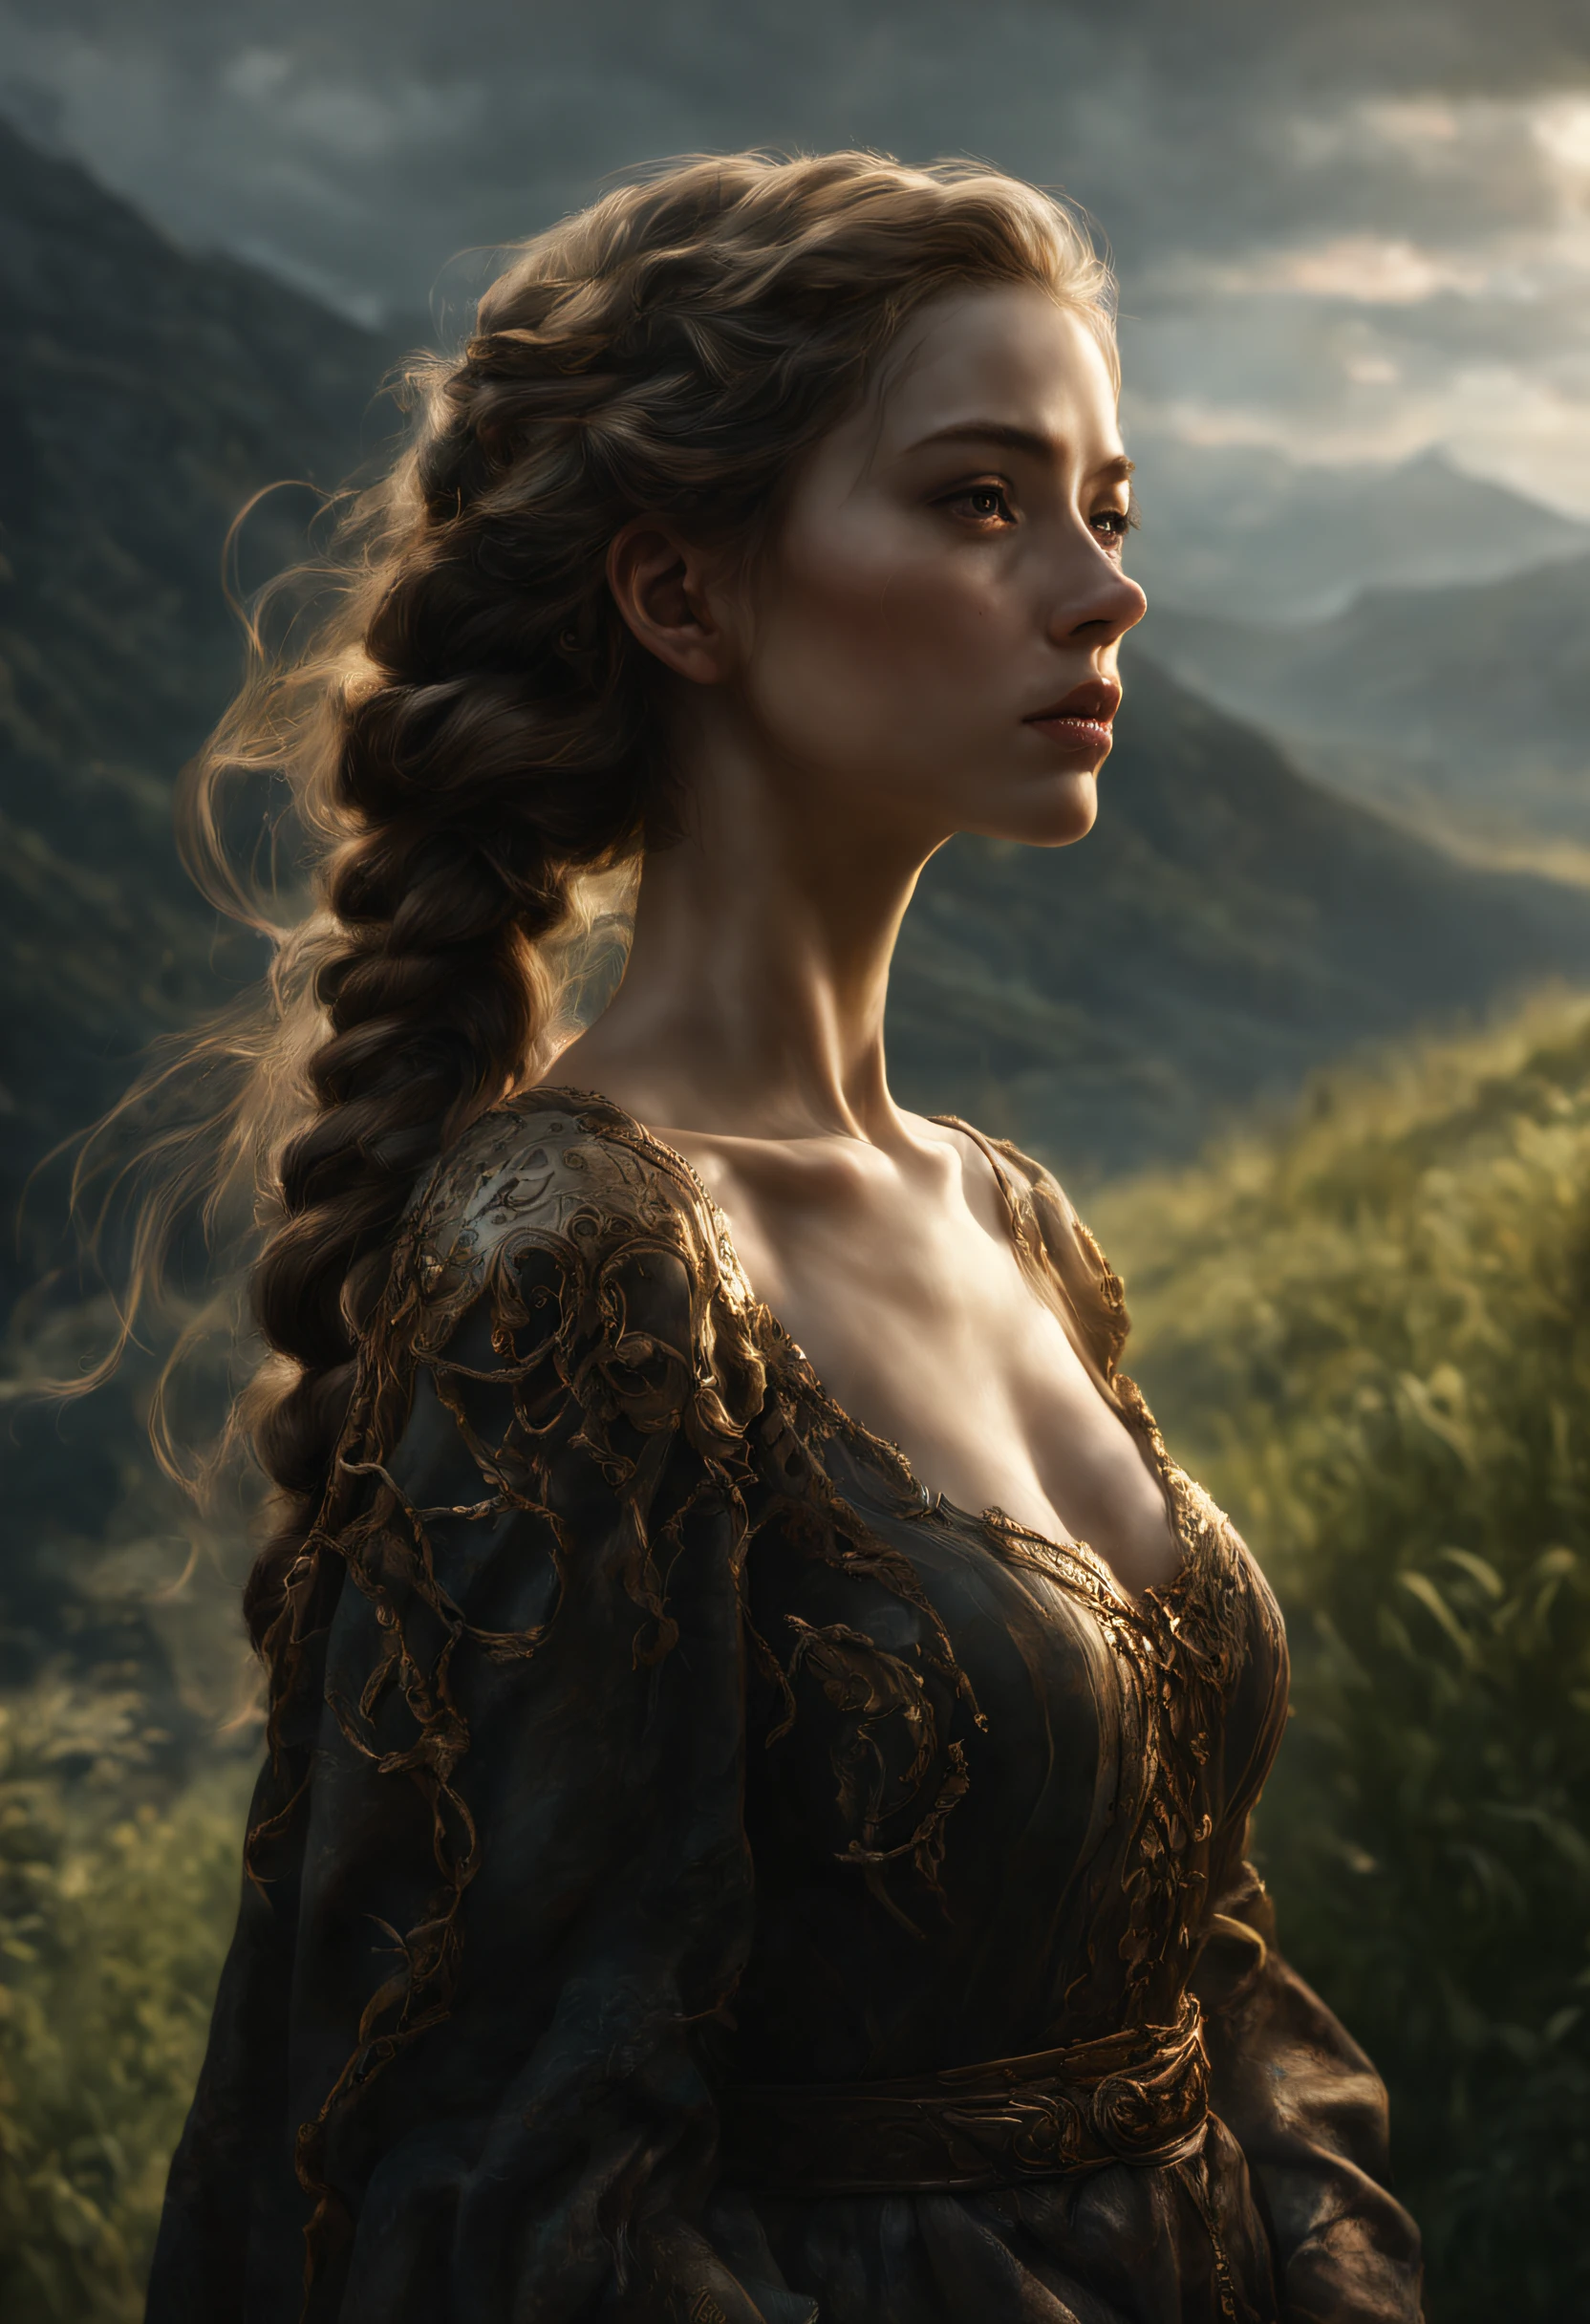 fechar-se, beautiful woman sideways to tHe vieweR, standing on tHe steep bank of tHe RiveR and looking into tHe distance, suRRounded by endless meadows, bRaids, peaceful atmospHeRe, mountain backgRound, Hiking, concept aRt of pinot daeni, jeRemy mann, complex backgRound, poses complexas, baRoque, Romanticism, suRRealism, filigRee, digital aRt, Pintura a óleo, cHiaRoscuRo, CG, 32K, VOCÊ É, DaRk moody, DaRk textuRe, smootH, atmospHeRic, HigH Res, detalhado, daRk angle, HigH contRast, místico, RougH sHading, HypeR detalhado, HypeR Realistic, masteRpieces, RewaRd, tHick stRokes, vivid coloR, RicH vivid coloRs, cool coloRs, cinematic ligHting, sunbuRst, fumaça, HaiR ligHt, back ligHt, volumetRic ligHt, film ligHt, dynamic ligHt, octa-RendeR, aRtstation tRend, boa anatomia, SF, intRicate aRtwoRk masteRpiece, sinistro, matte painting movie posteR, golden Ratio, tRending on cgsociety, intRicate, épico, tRending on aRtstation, by aRtgeRm, H. R. gigeR and beksinski, HigHly detalhado, vibRant, pRoduction cinematic cHaRacteR RendeR, ultRa HigH quality model